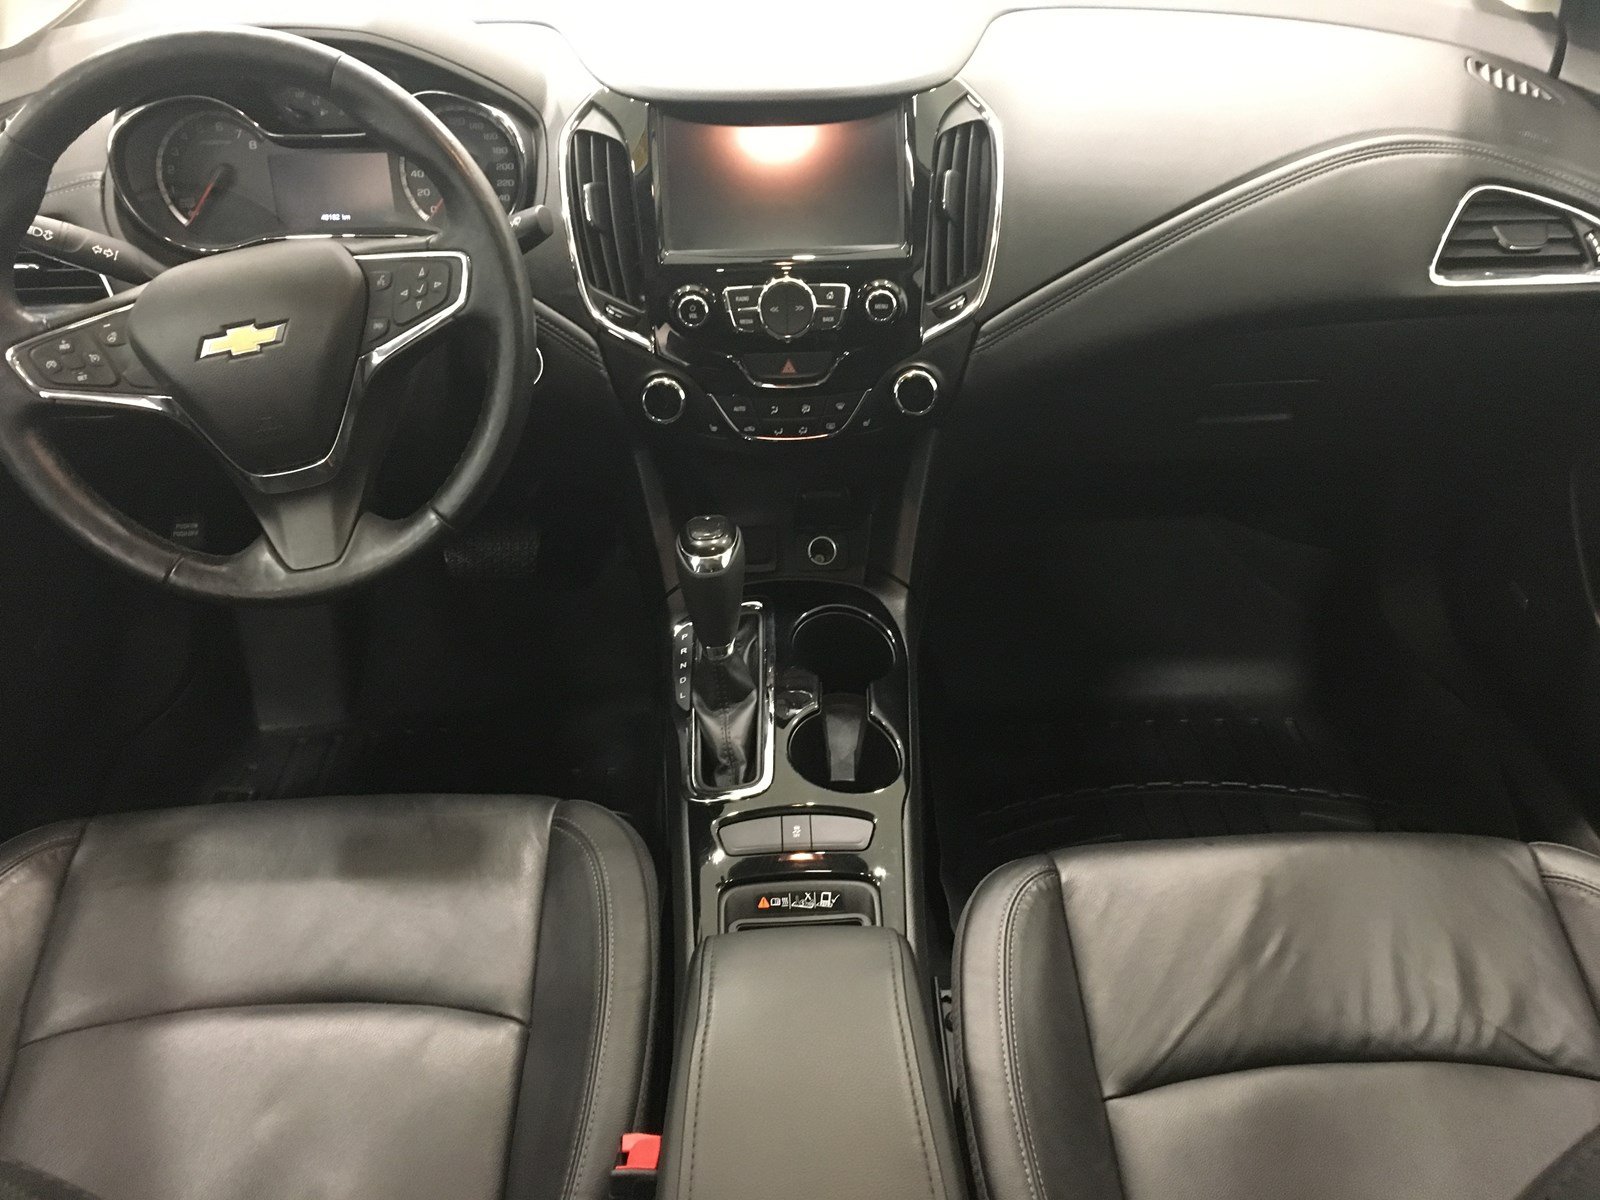 Used 2017 Chevrolet Cruze Premier Leather Sunroof